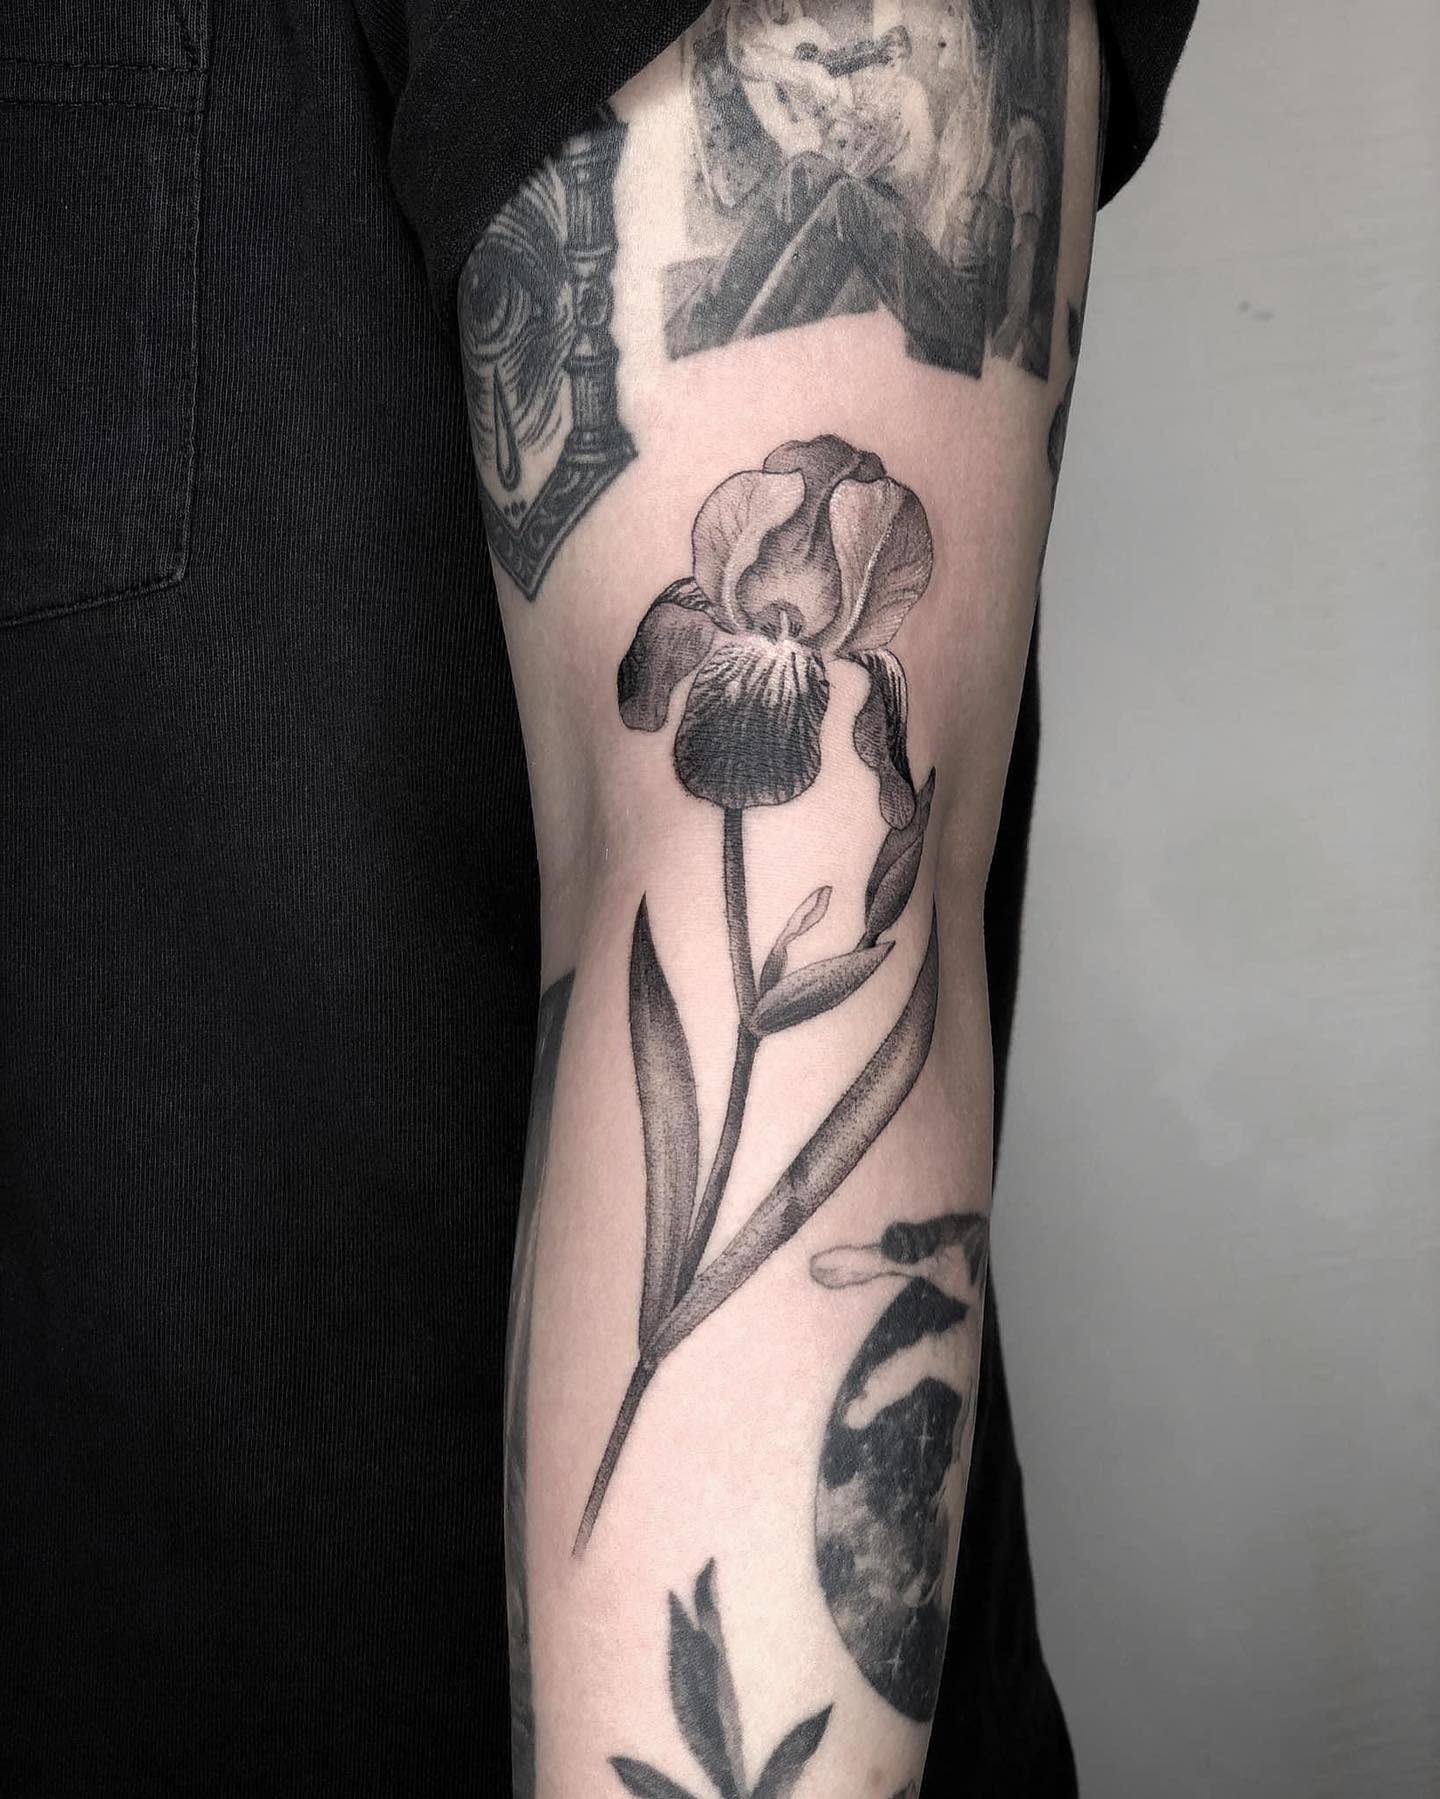 Sanctum Tattoo Studio  Iris  Lily linework tattoo from today Thank you  laurenjaynee for being such a trooper with your first tat going on the  ribs lilytattoo iristattoo flowertattoo ribtattoo floraltattoo 